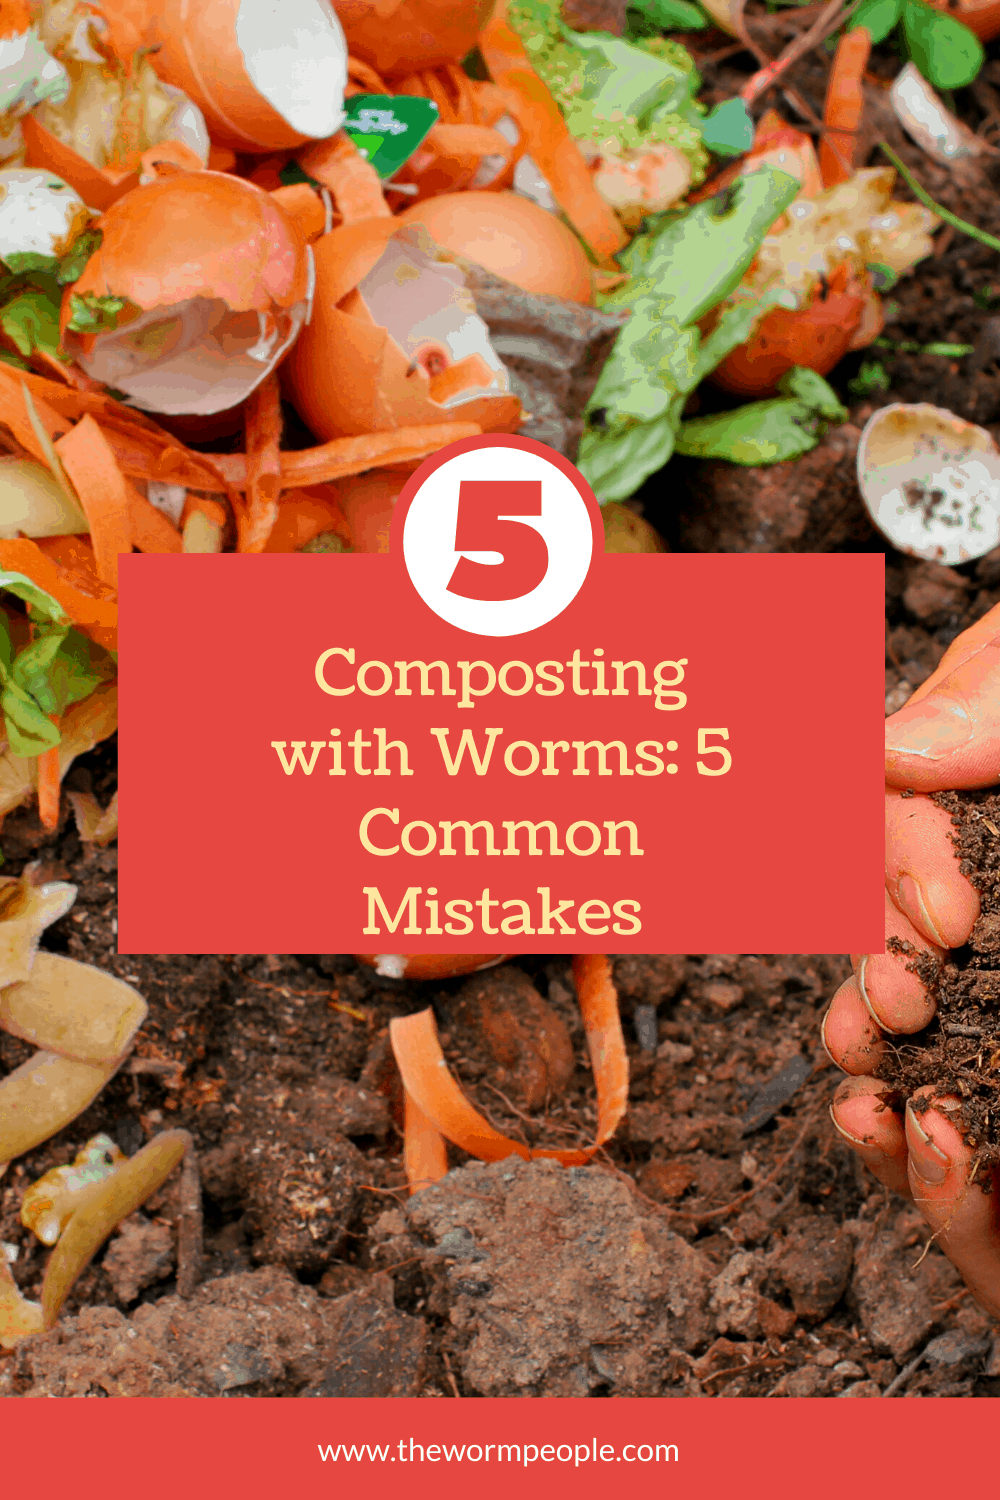 Composting with Worms: 5 Common Mistakes